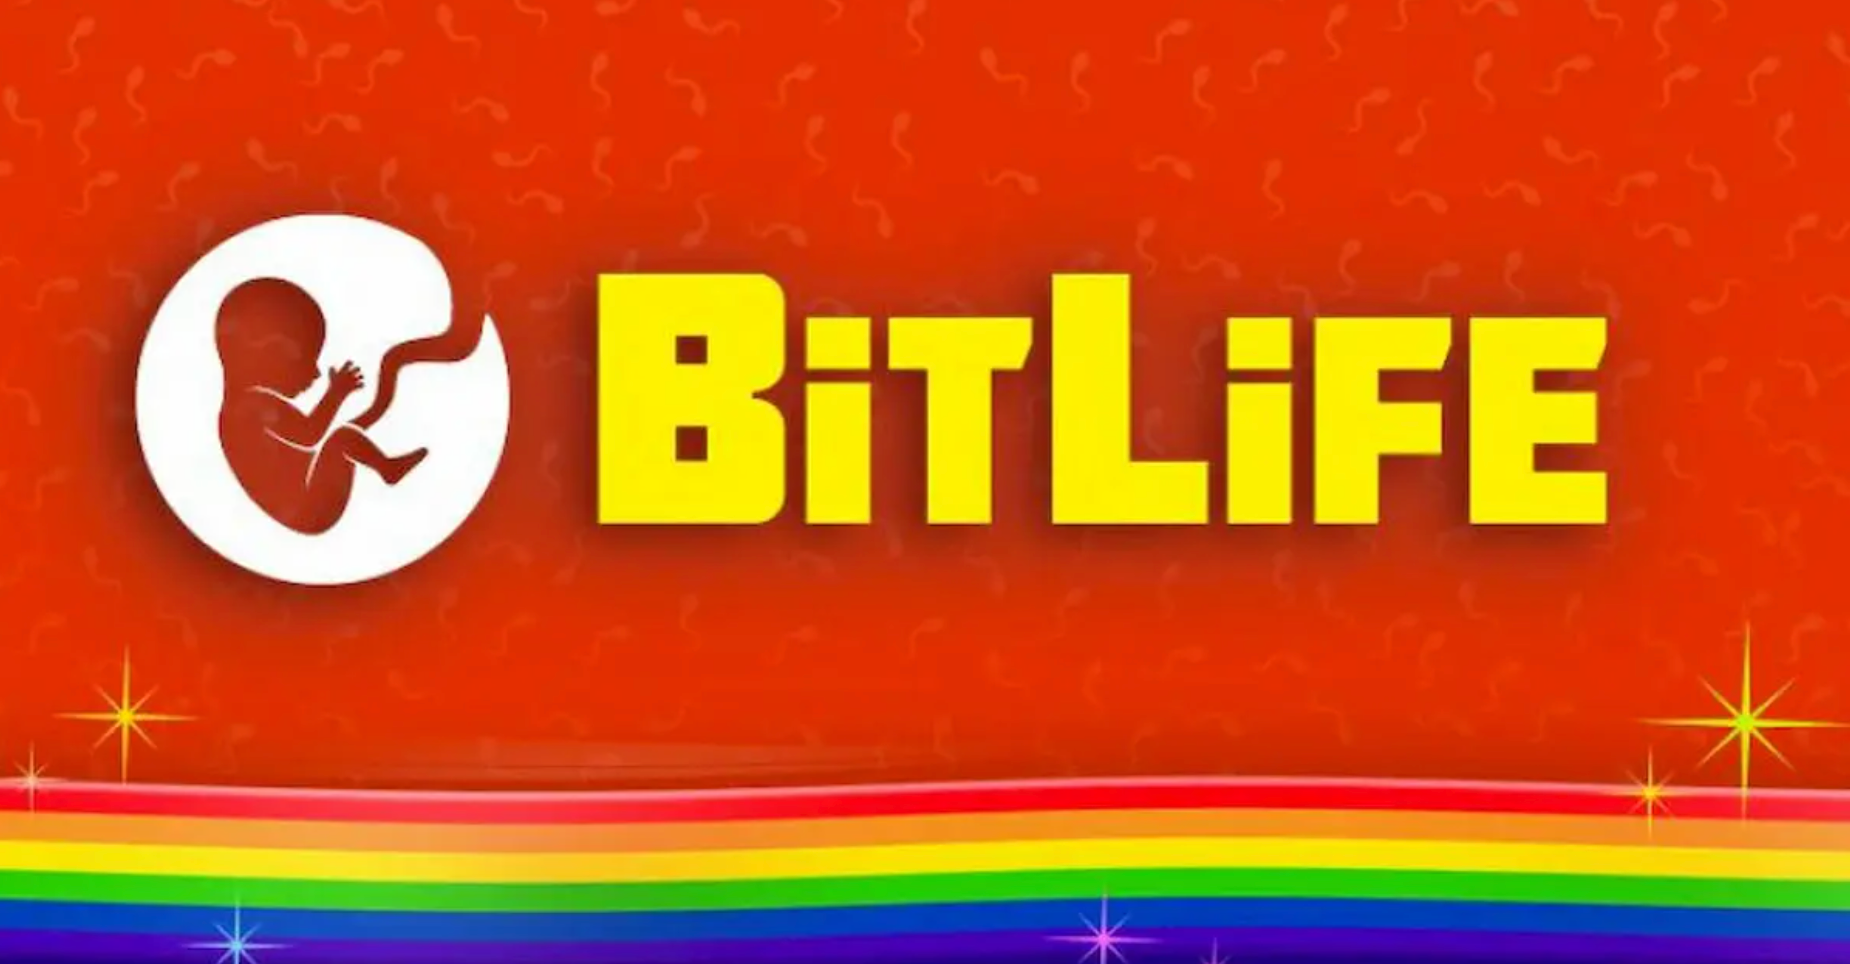 How To Break Out Of Prison In Bitlife Tips And Tricks - how to break out of prison in roblox